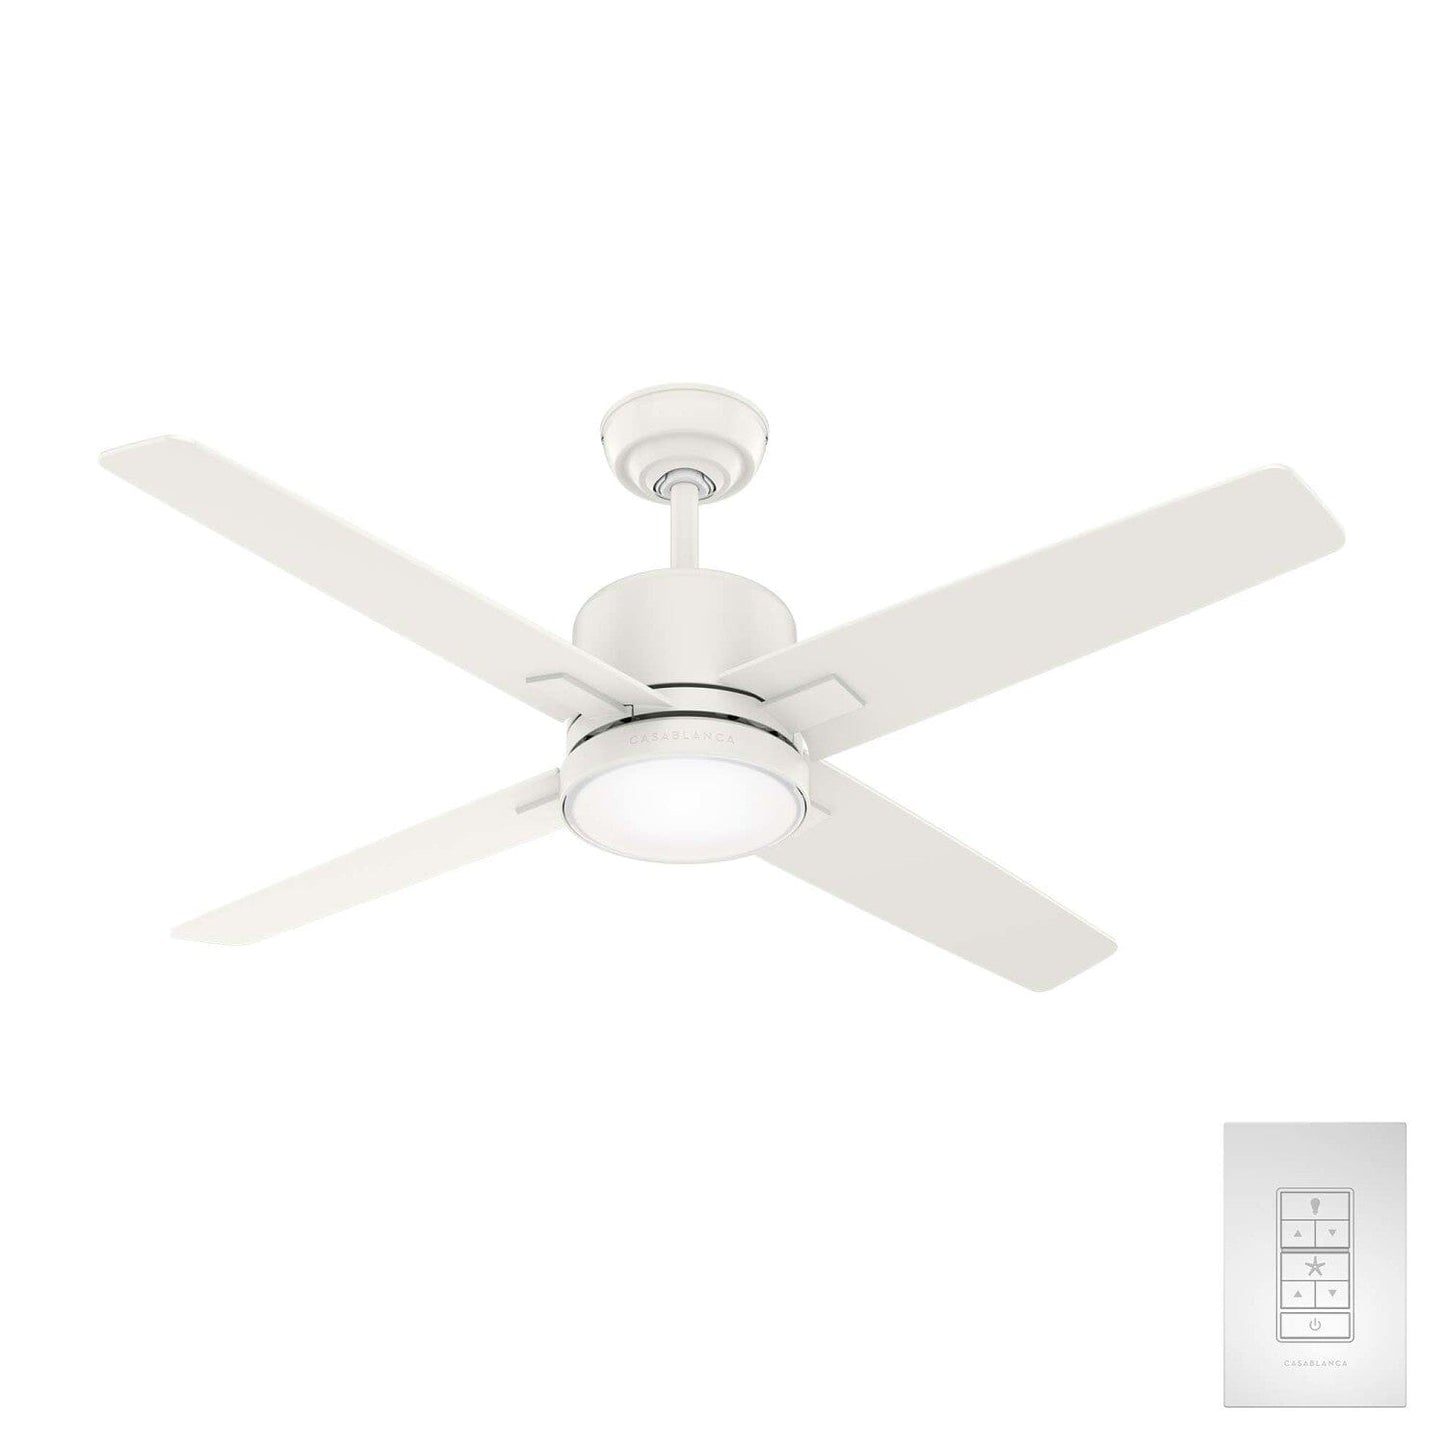 Axial with LED Light 52 inch Ceiling Fans Casablanca Fresh White - Rustic Oak 